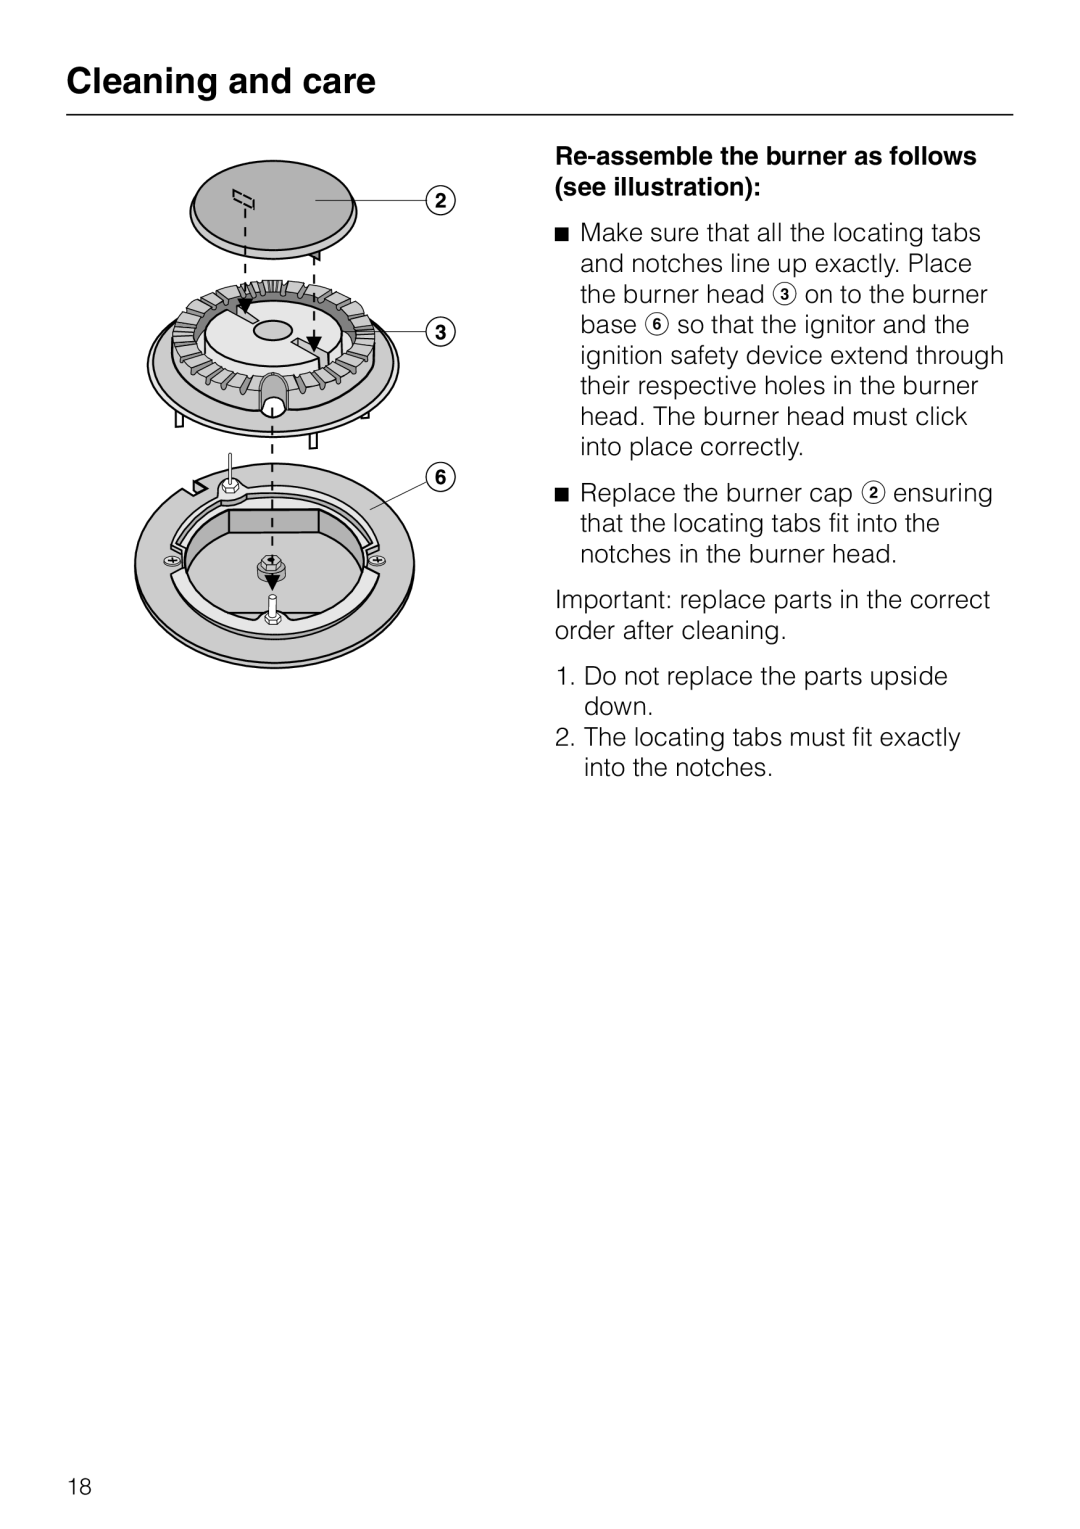 Miele KM 417 manual Re-assemblethe burner as follows see illustration, Cleaning and care 